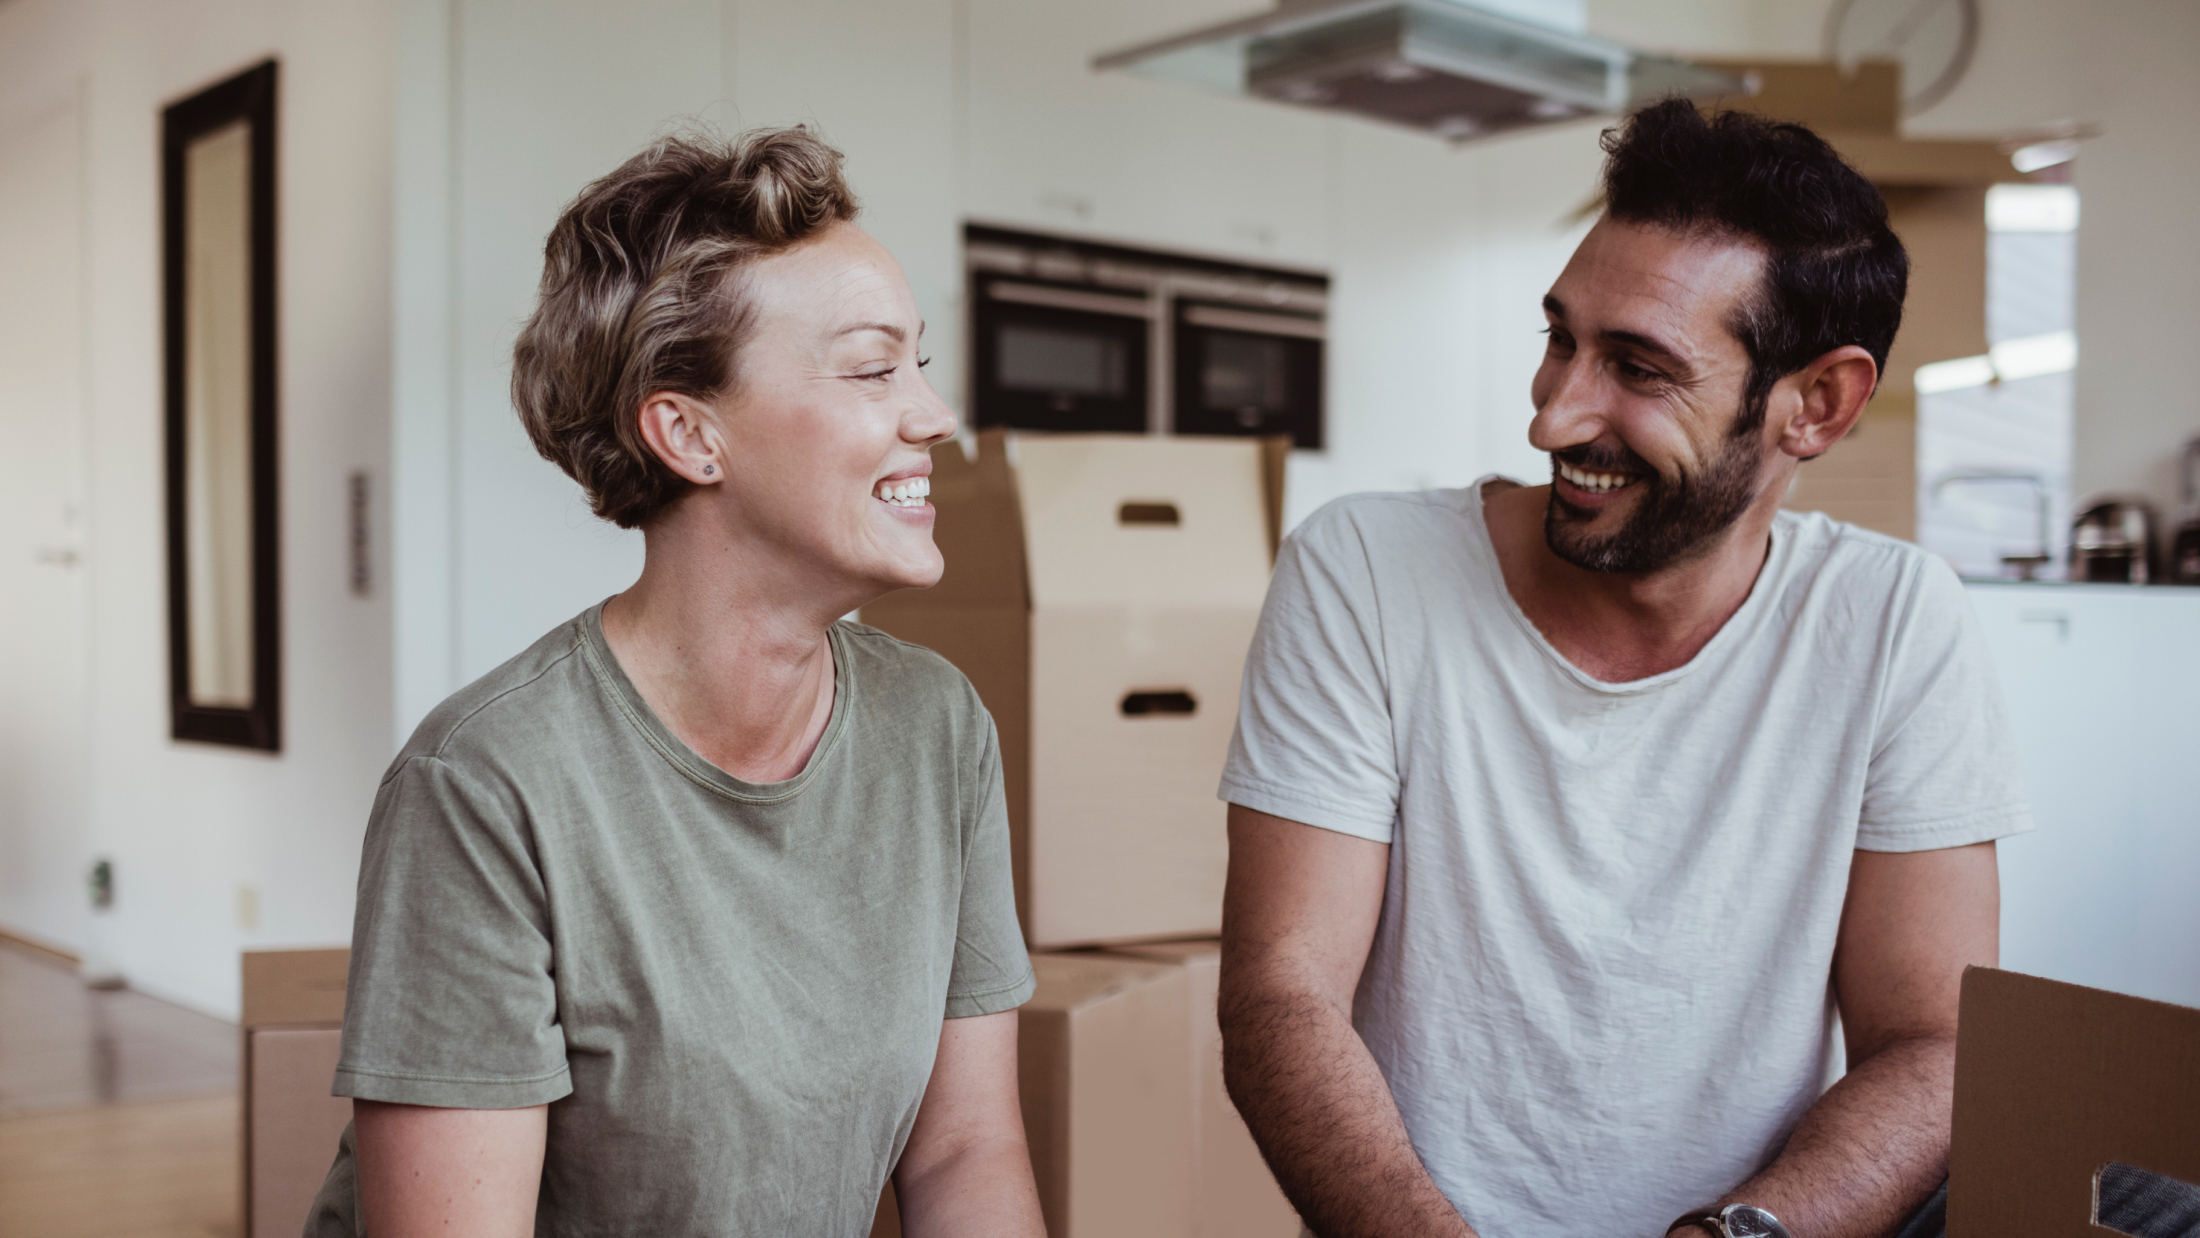 Man and woman laughing together surrounded by boxes in new home